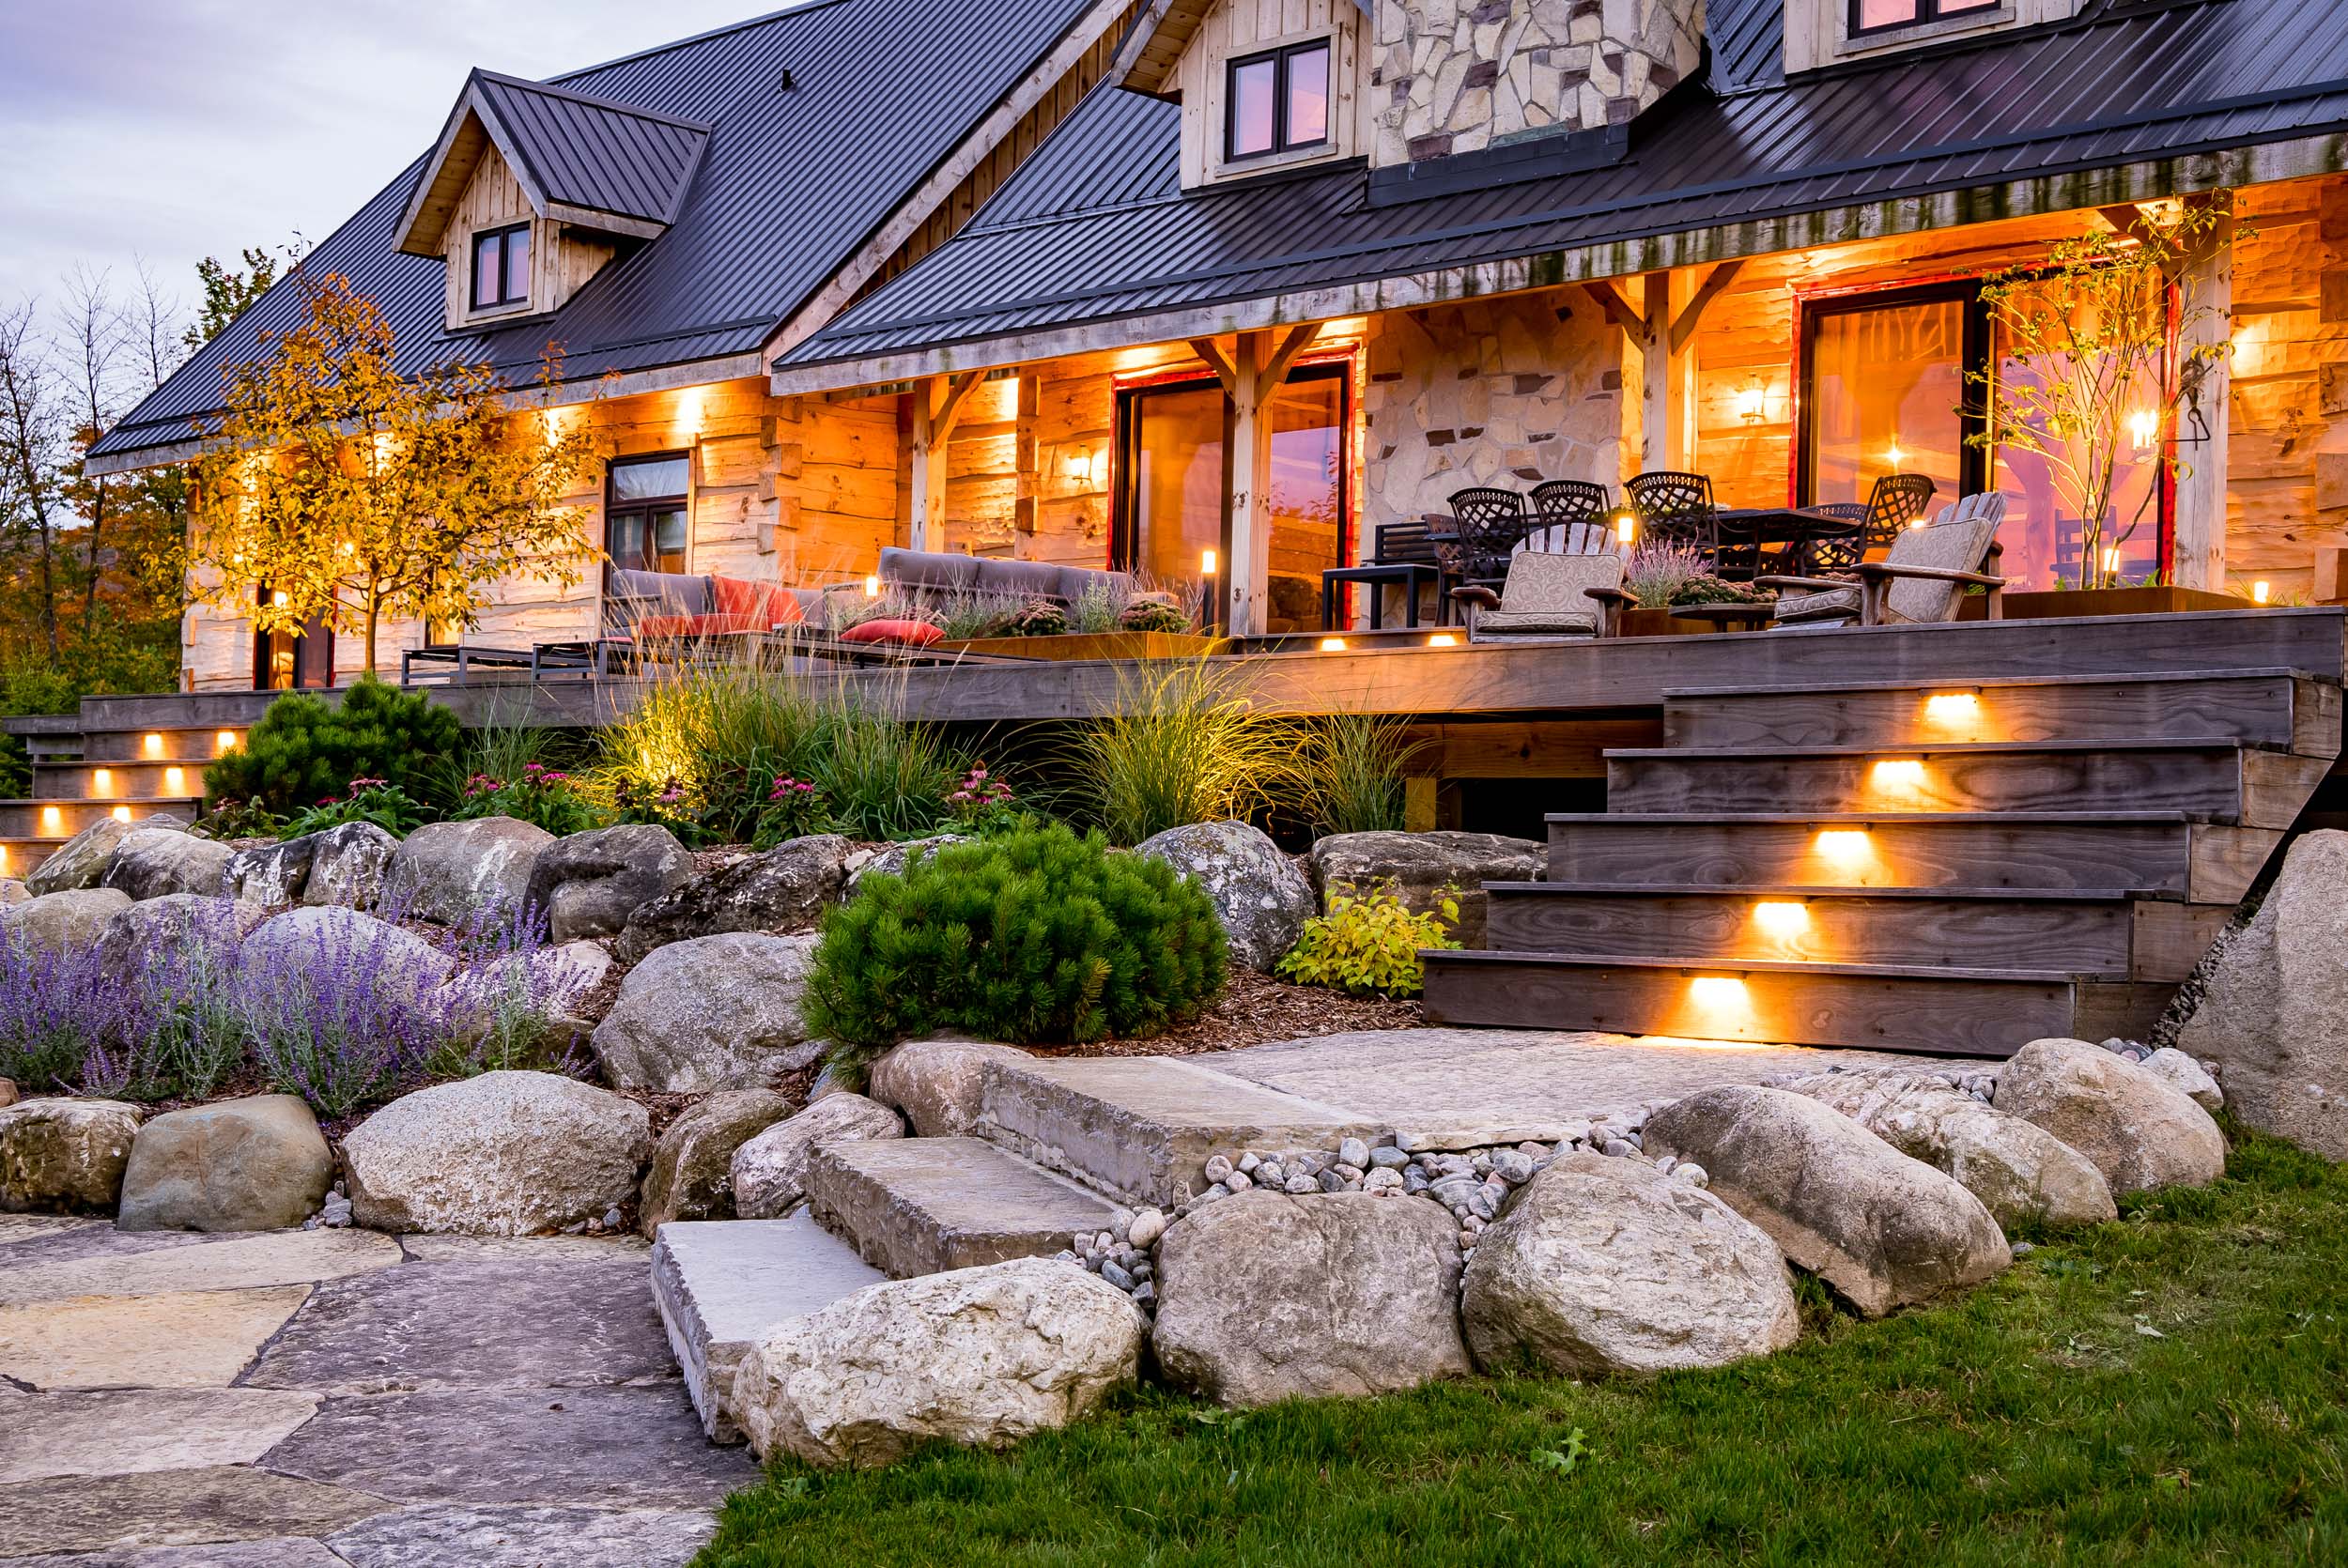 A rustic house with a stone and wood facade illuminated by warm lights. Landscaped garden, wooden terrace, and stone pathway leading to lush grounds.